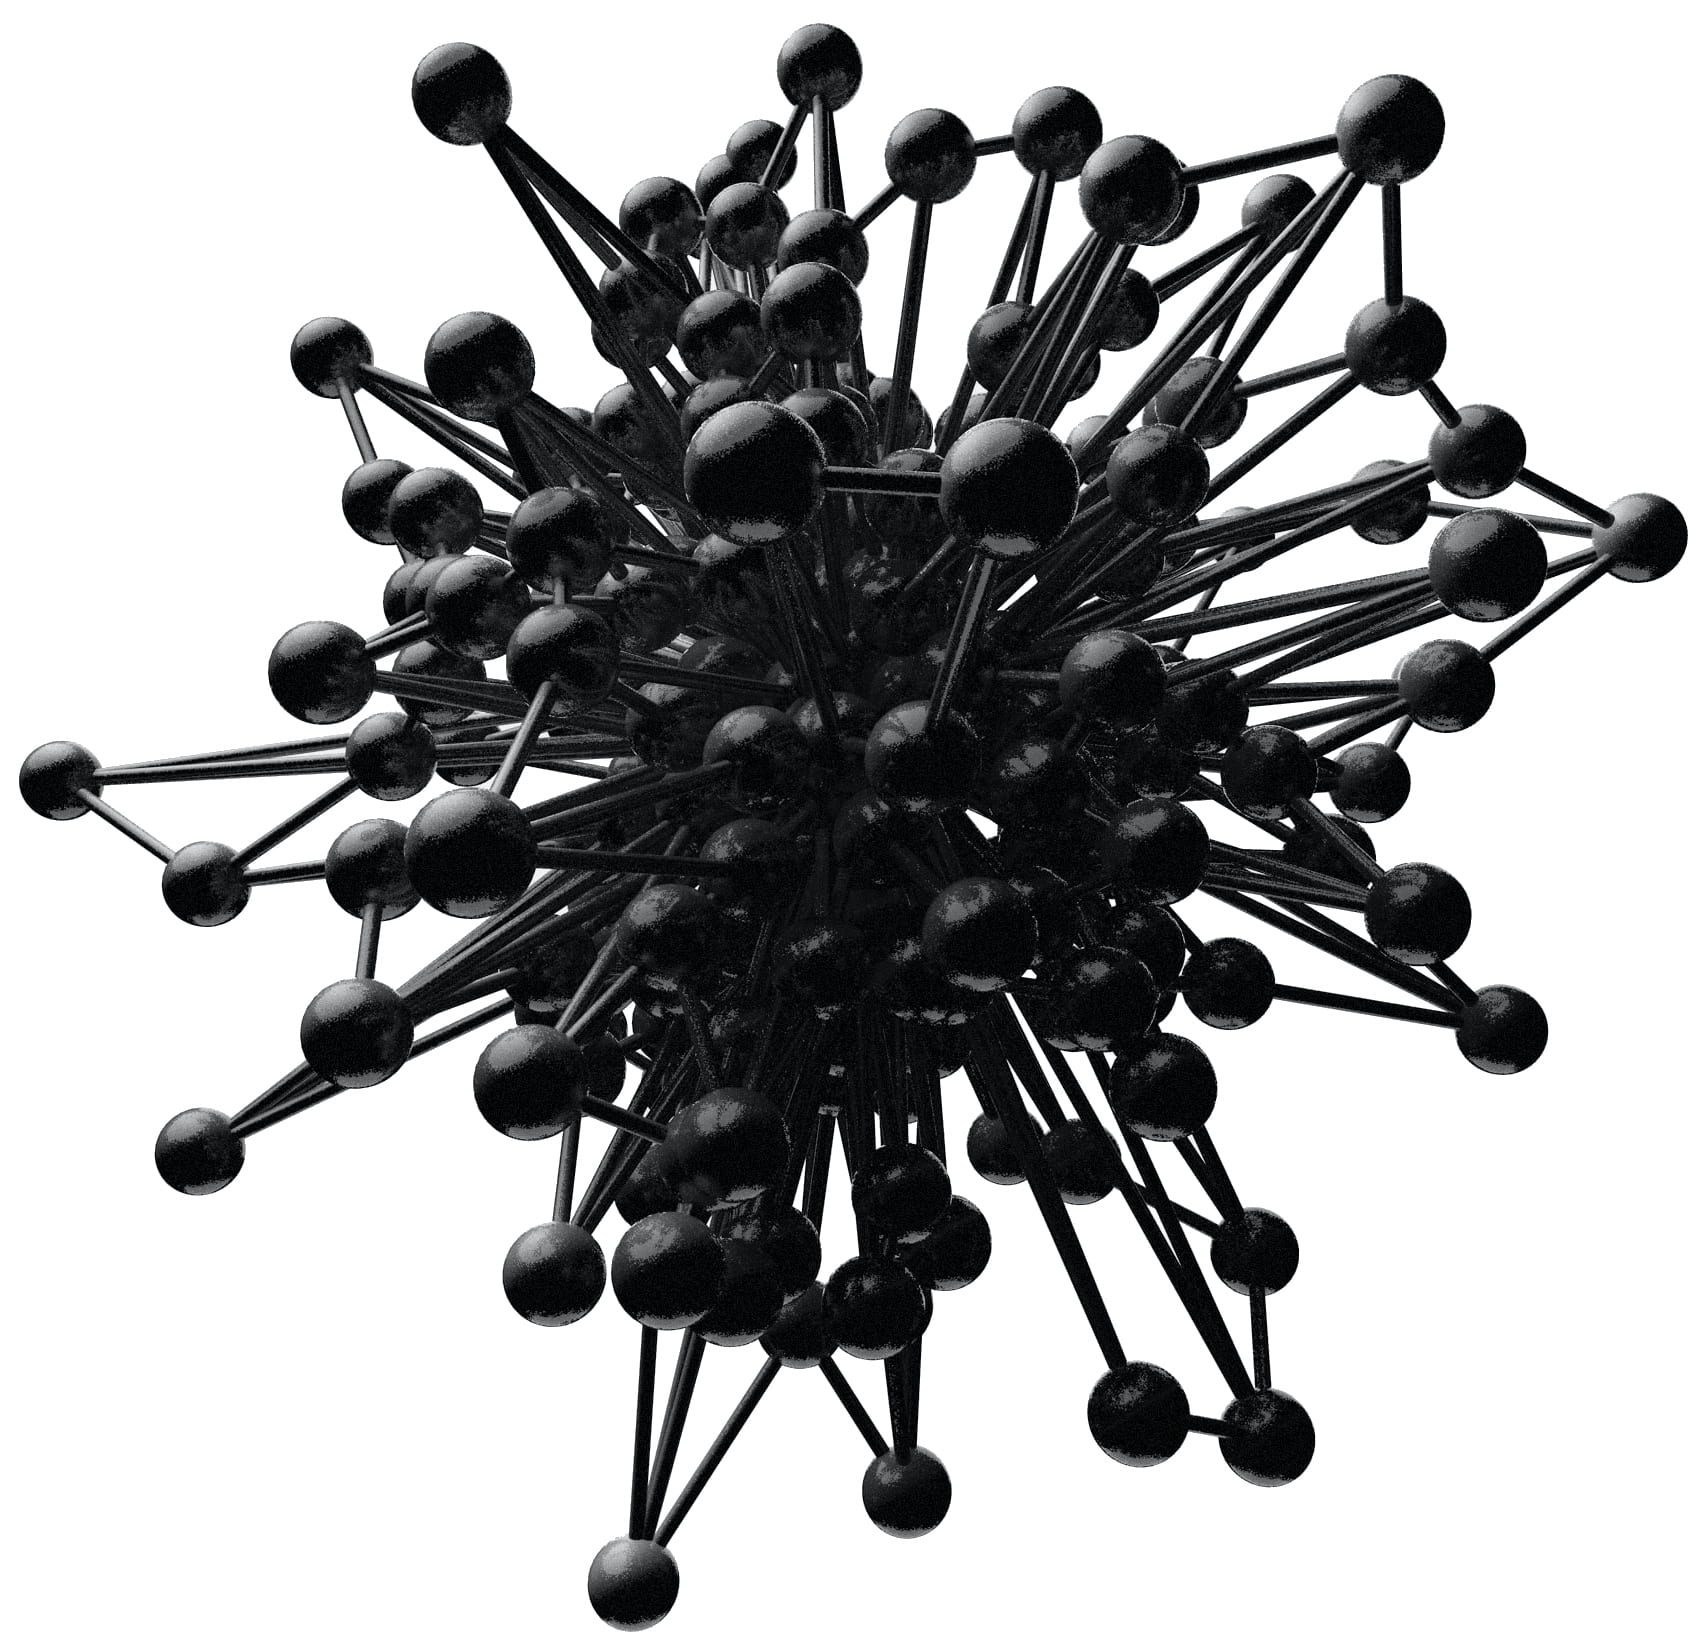 Geometric, black and white image of a molecule